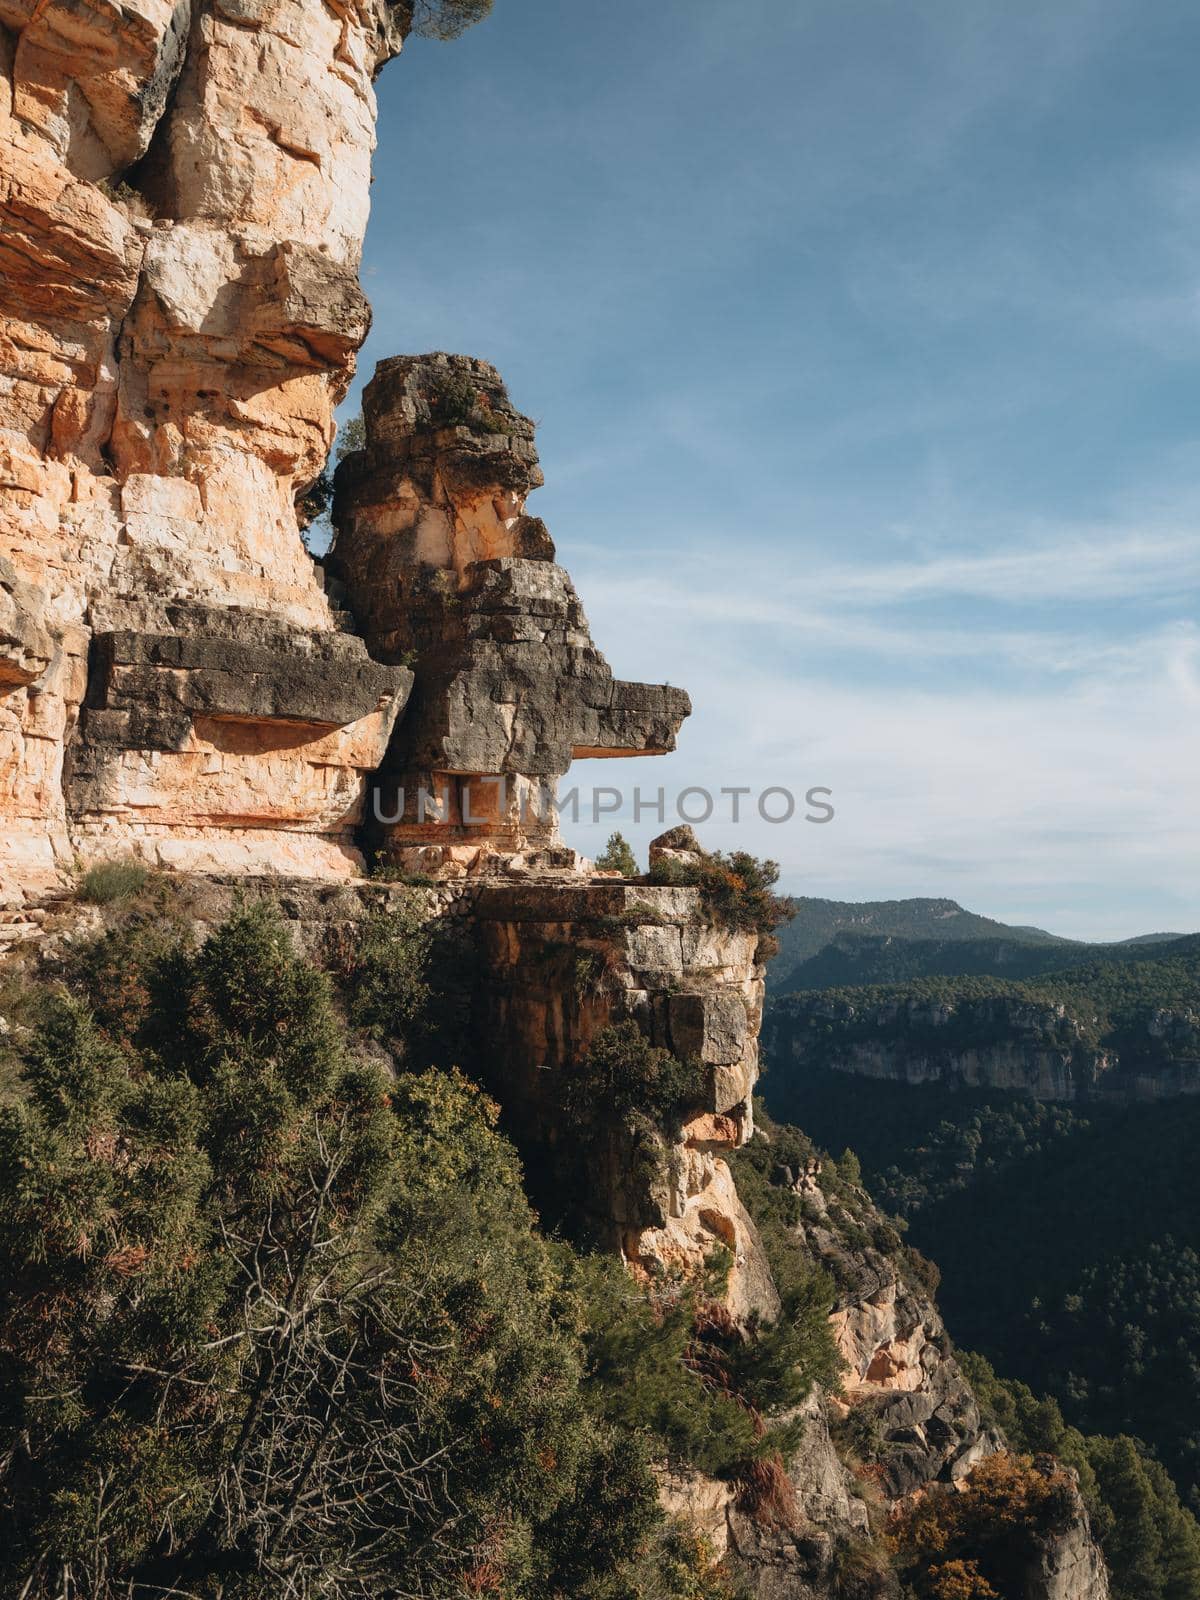 Rocky walls with reddish tones and pine forest in the Siurana mountains, Tarragona, Spain